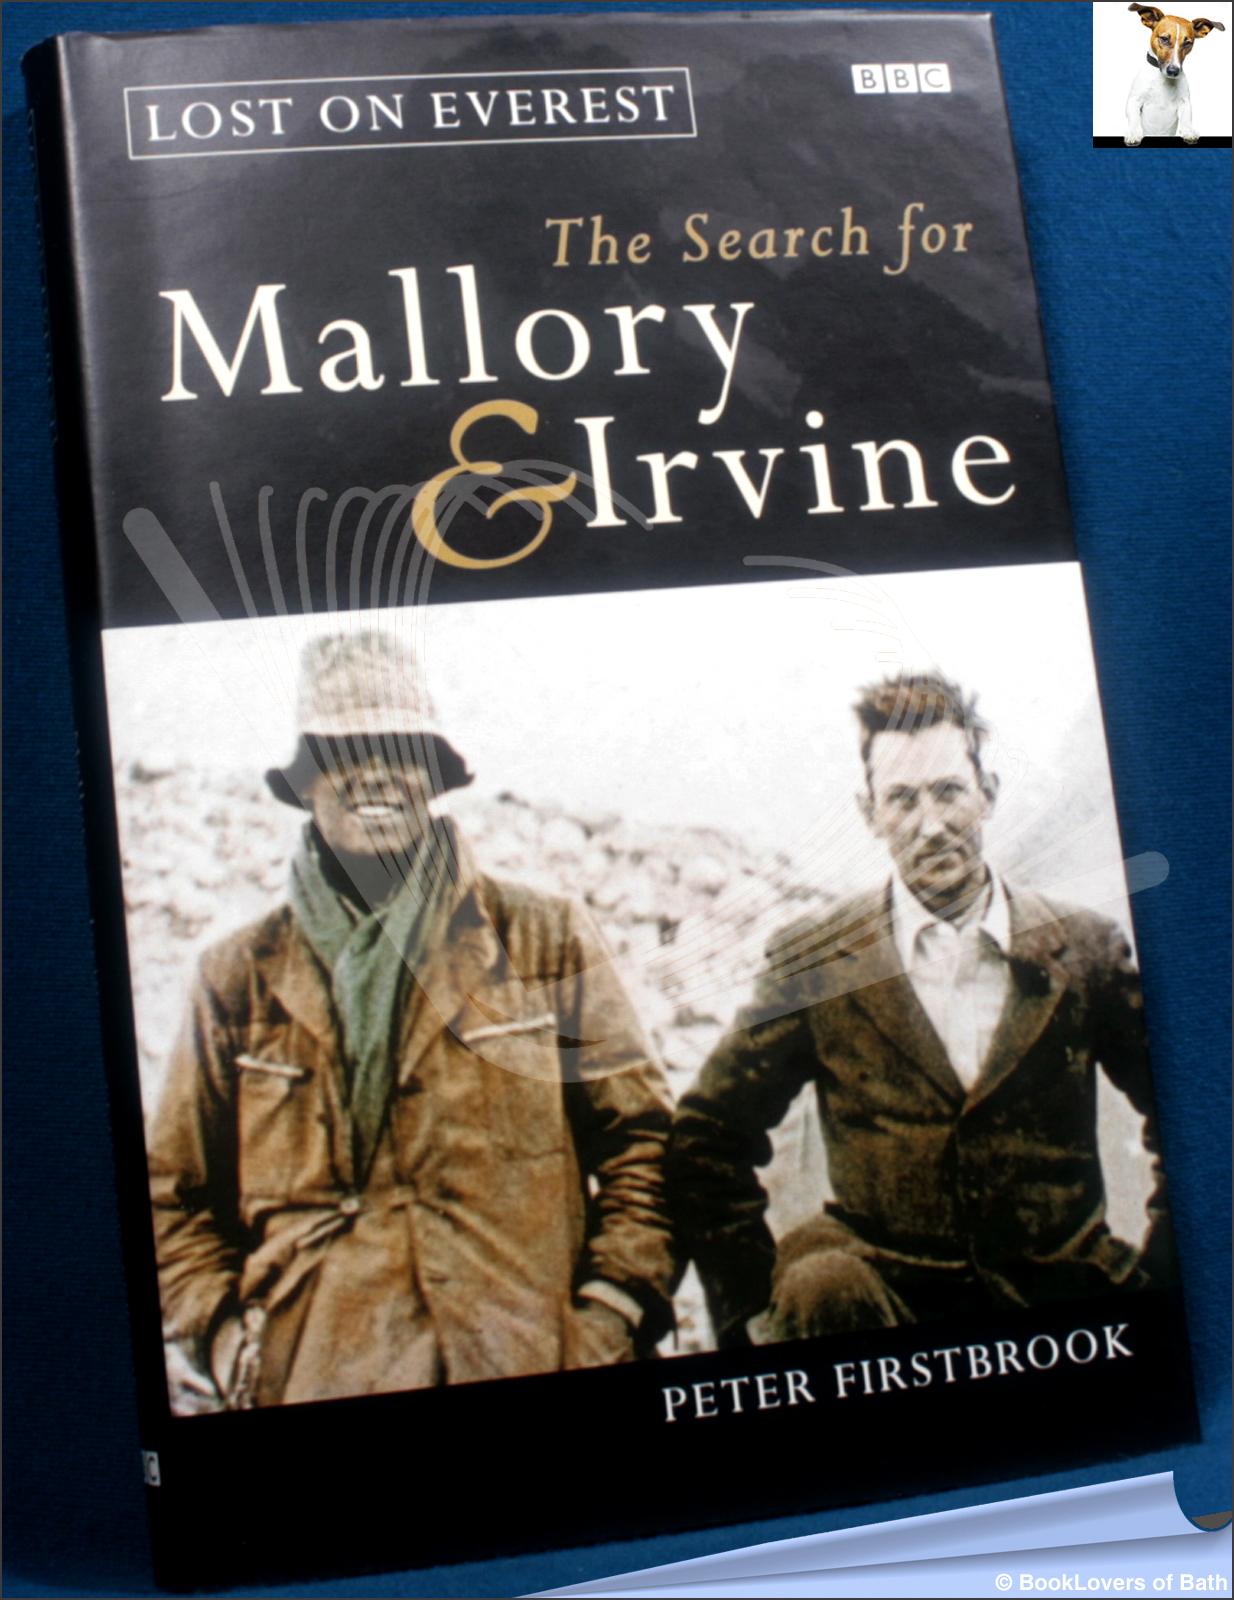 Lost on Everest: The Search for Mallory and Irvine - Peter Firstbrook